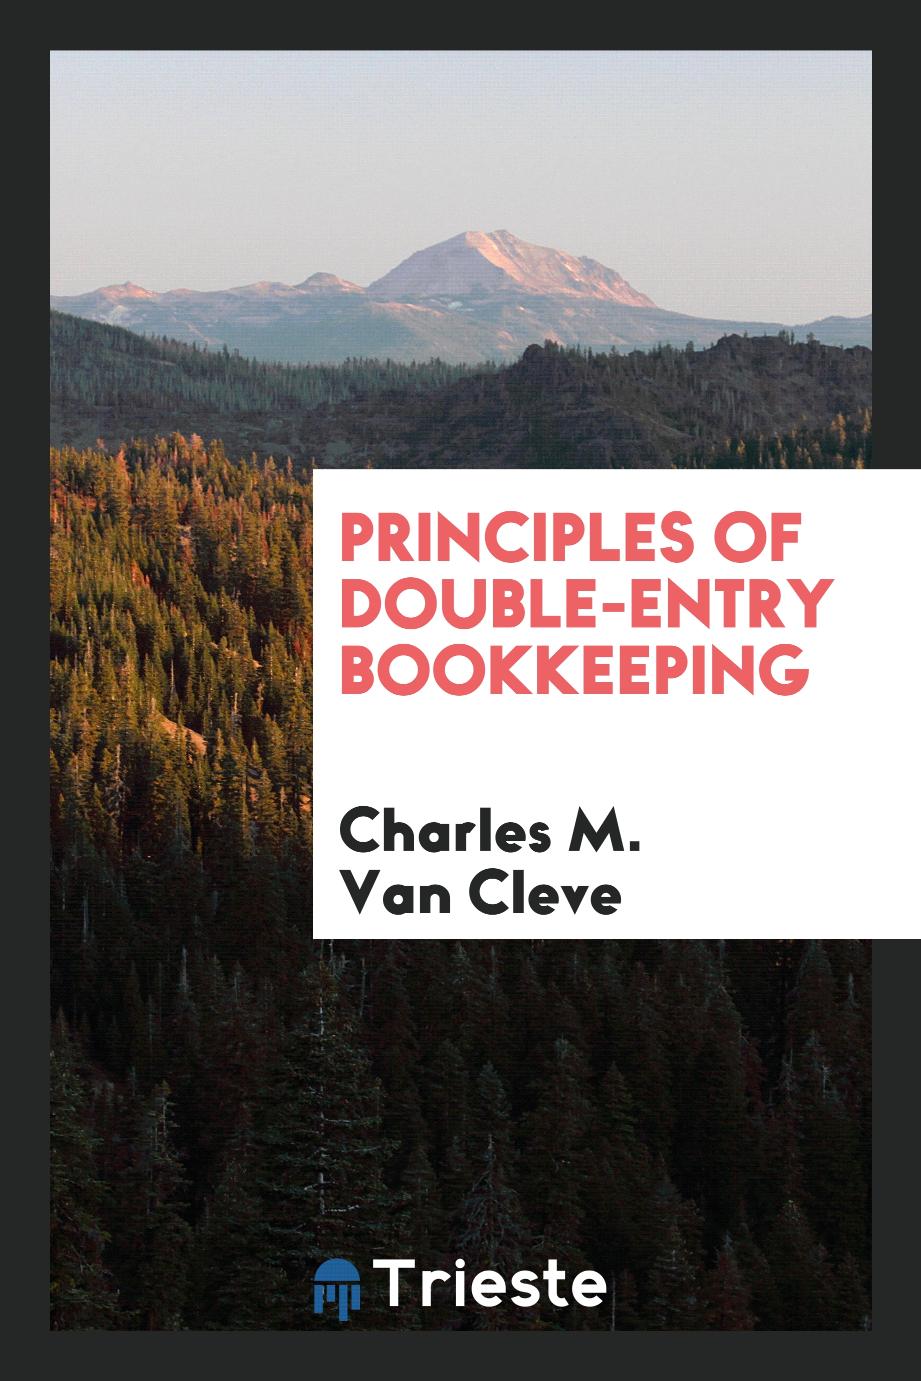 Principles of double-entry bookkeeping